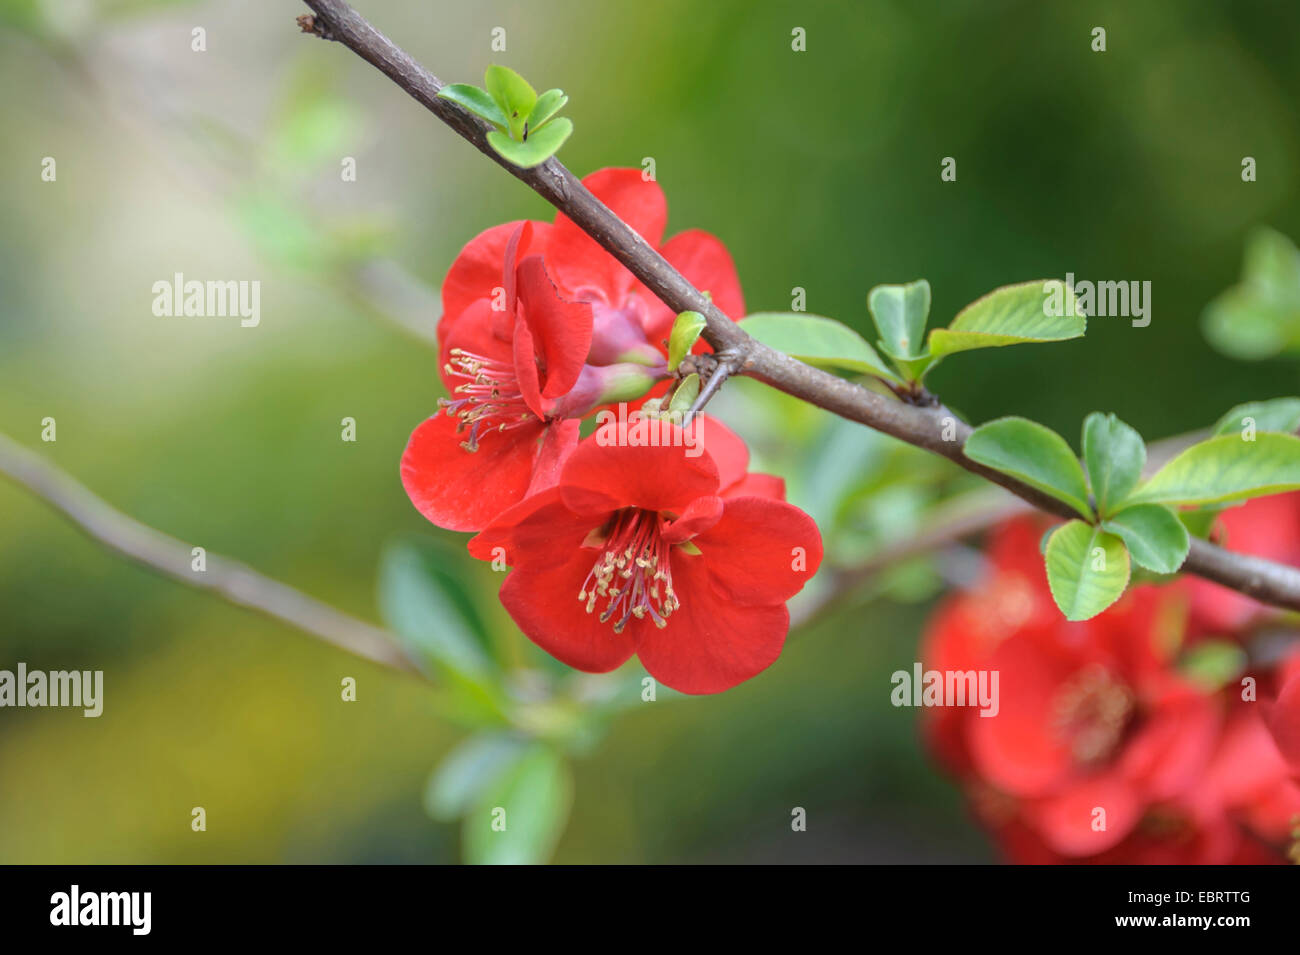 Ornamental quince, Chinese Flowering Quince (Chaenomeles speciosa 'Simonii', Chaenomeles speciosa Simonii), cultivar Simonii Stock Photo